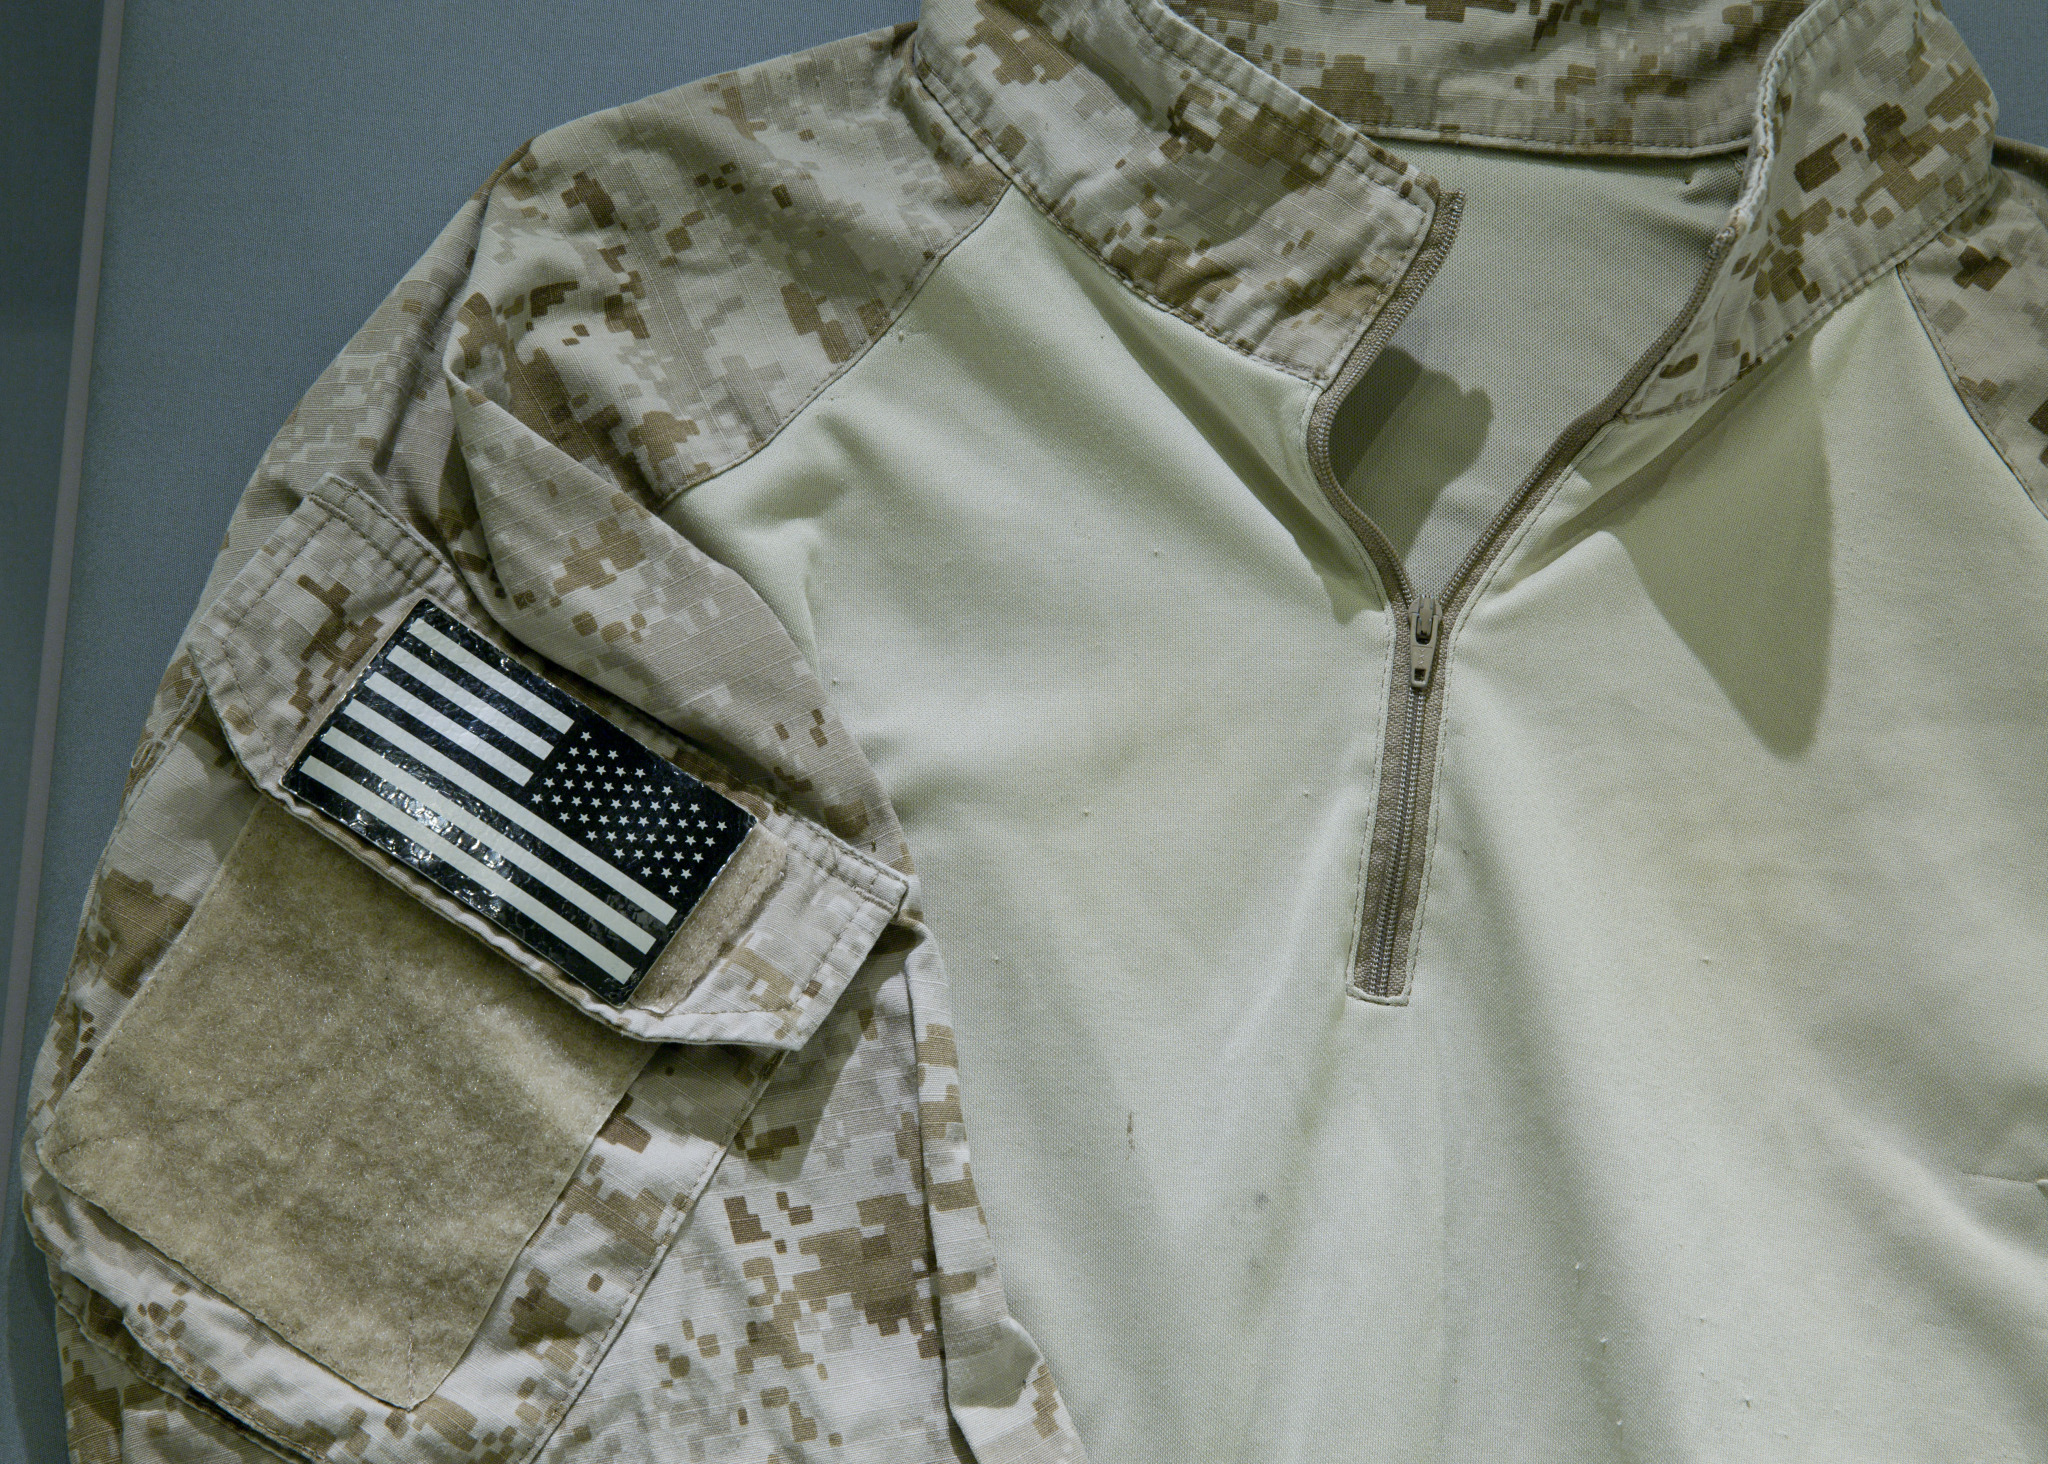 A camouflage uniform shit from a Navy Seal Team 6 member involved in the raid on Osama bin Laden’s compound is displayed at the Museum. A closeup of the tan and brown shirt shows a black and white American flag.